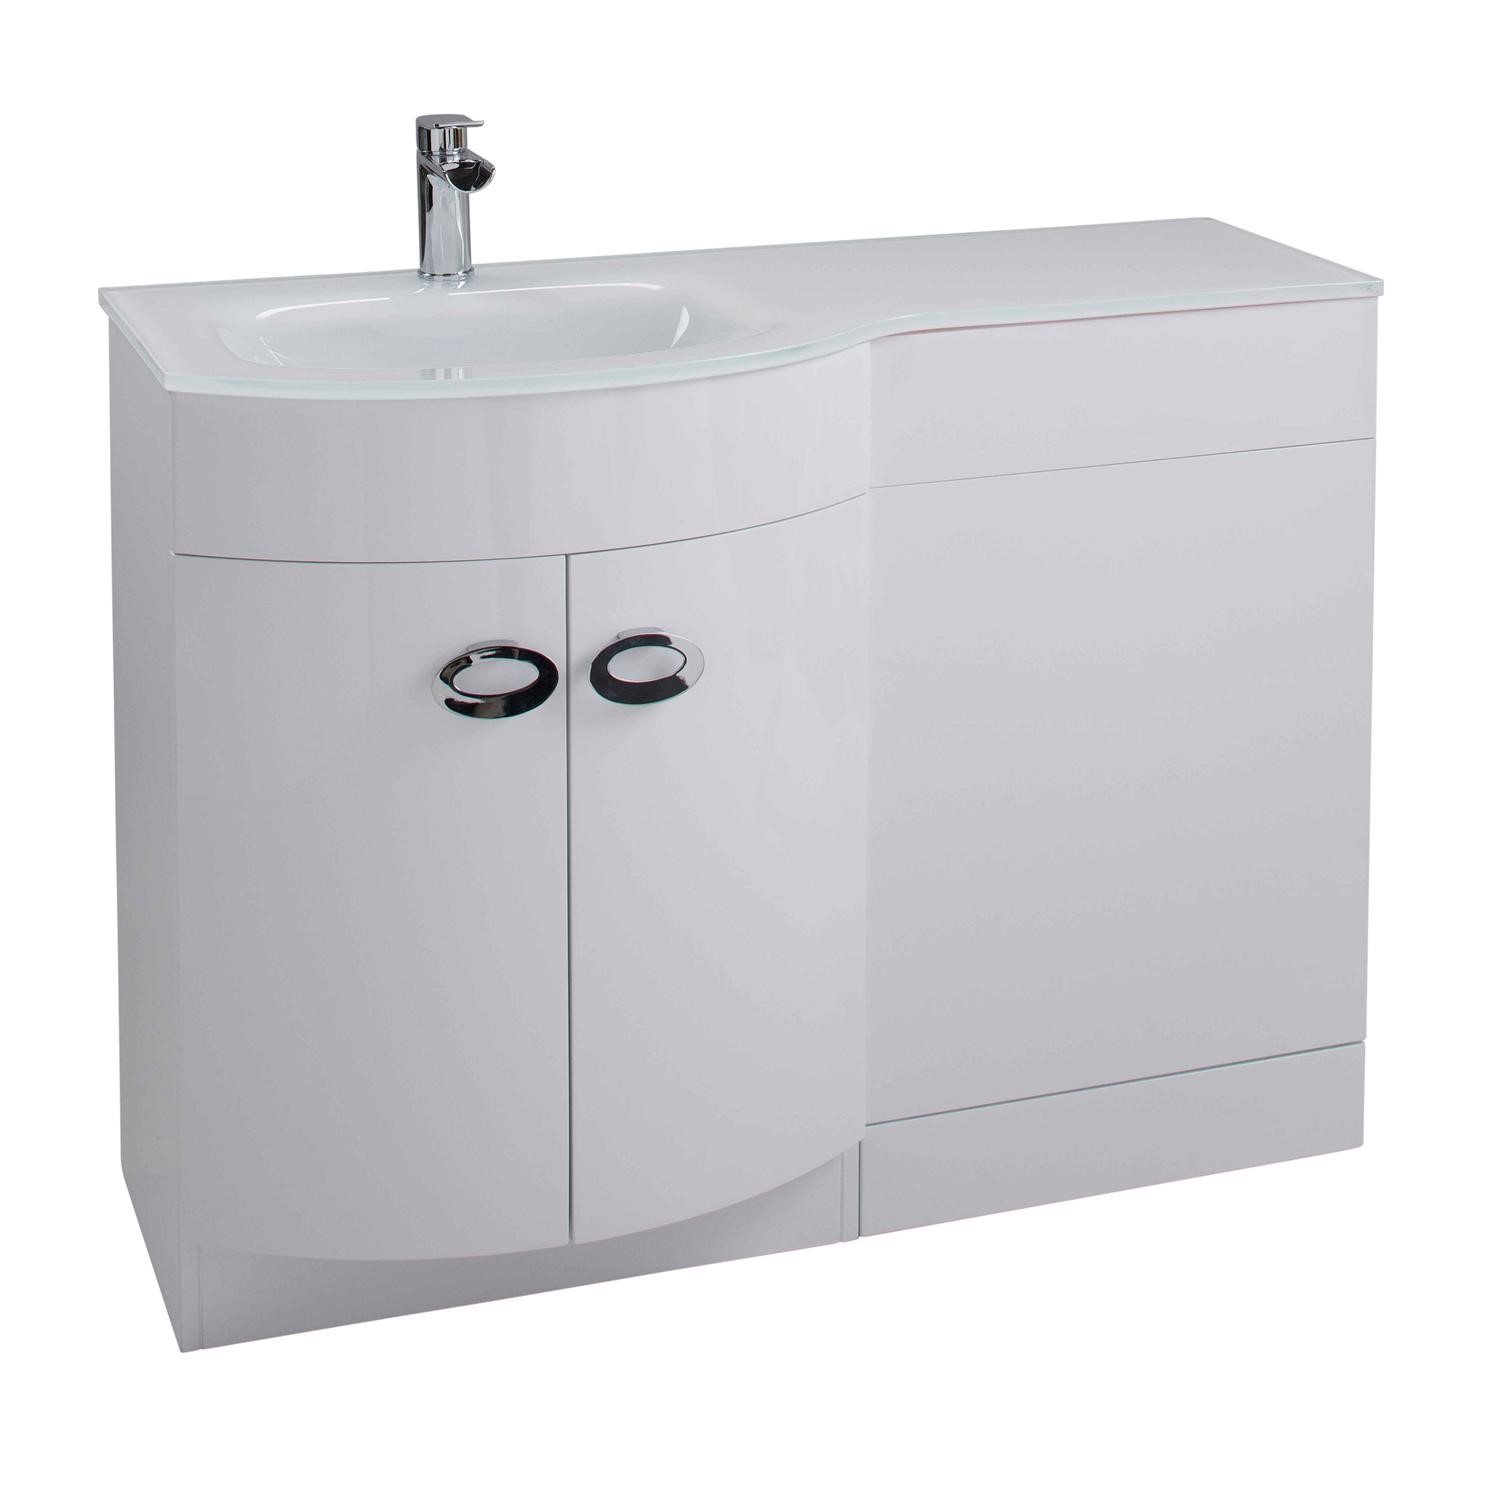 Curved White Left Hand Bathroom Vanity, Curved White Bathroom Vanity Unit